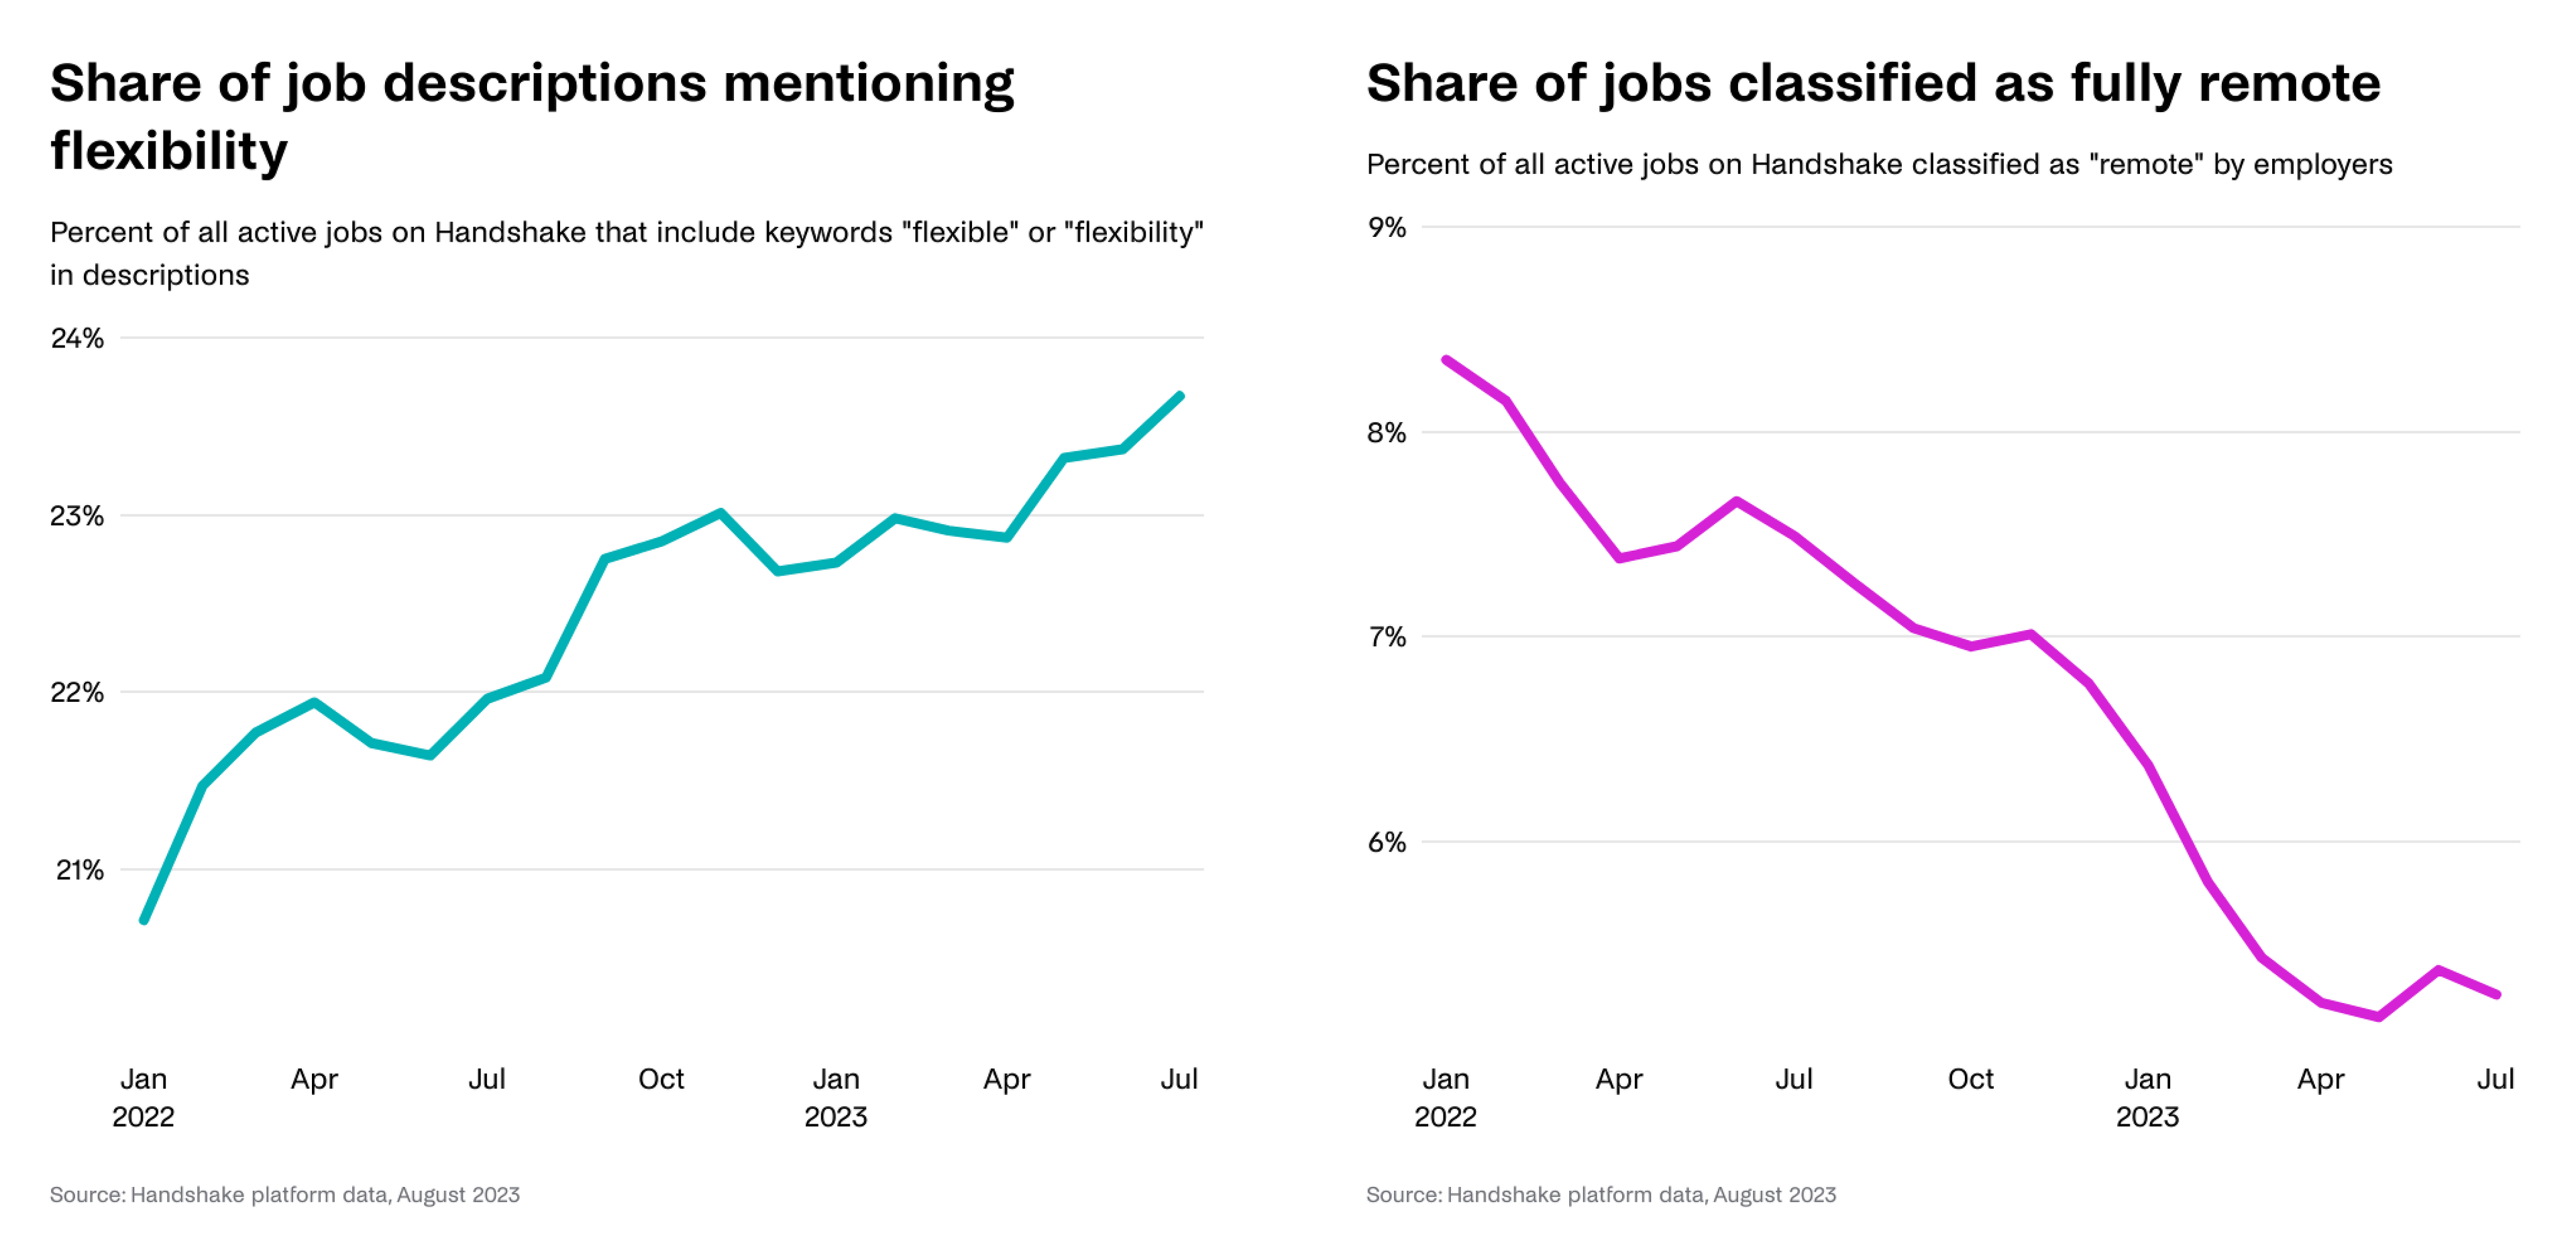 Line charts: The share of job descriptions on Handshake mentioning flexibility has increased over the past 18 months, even as the share of remote jobs has declined